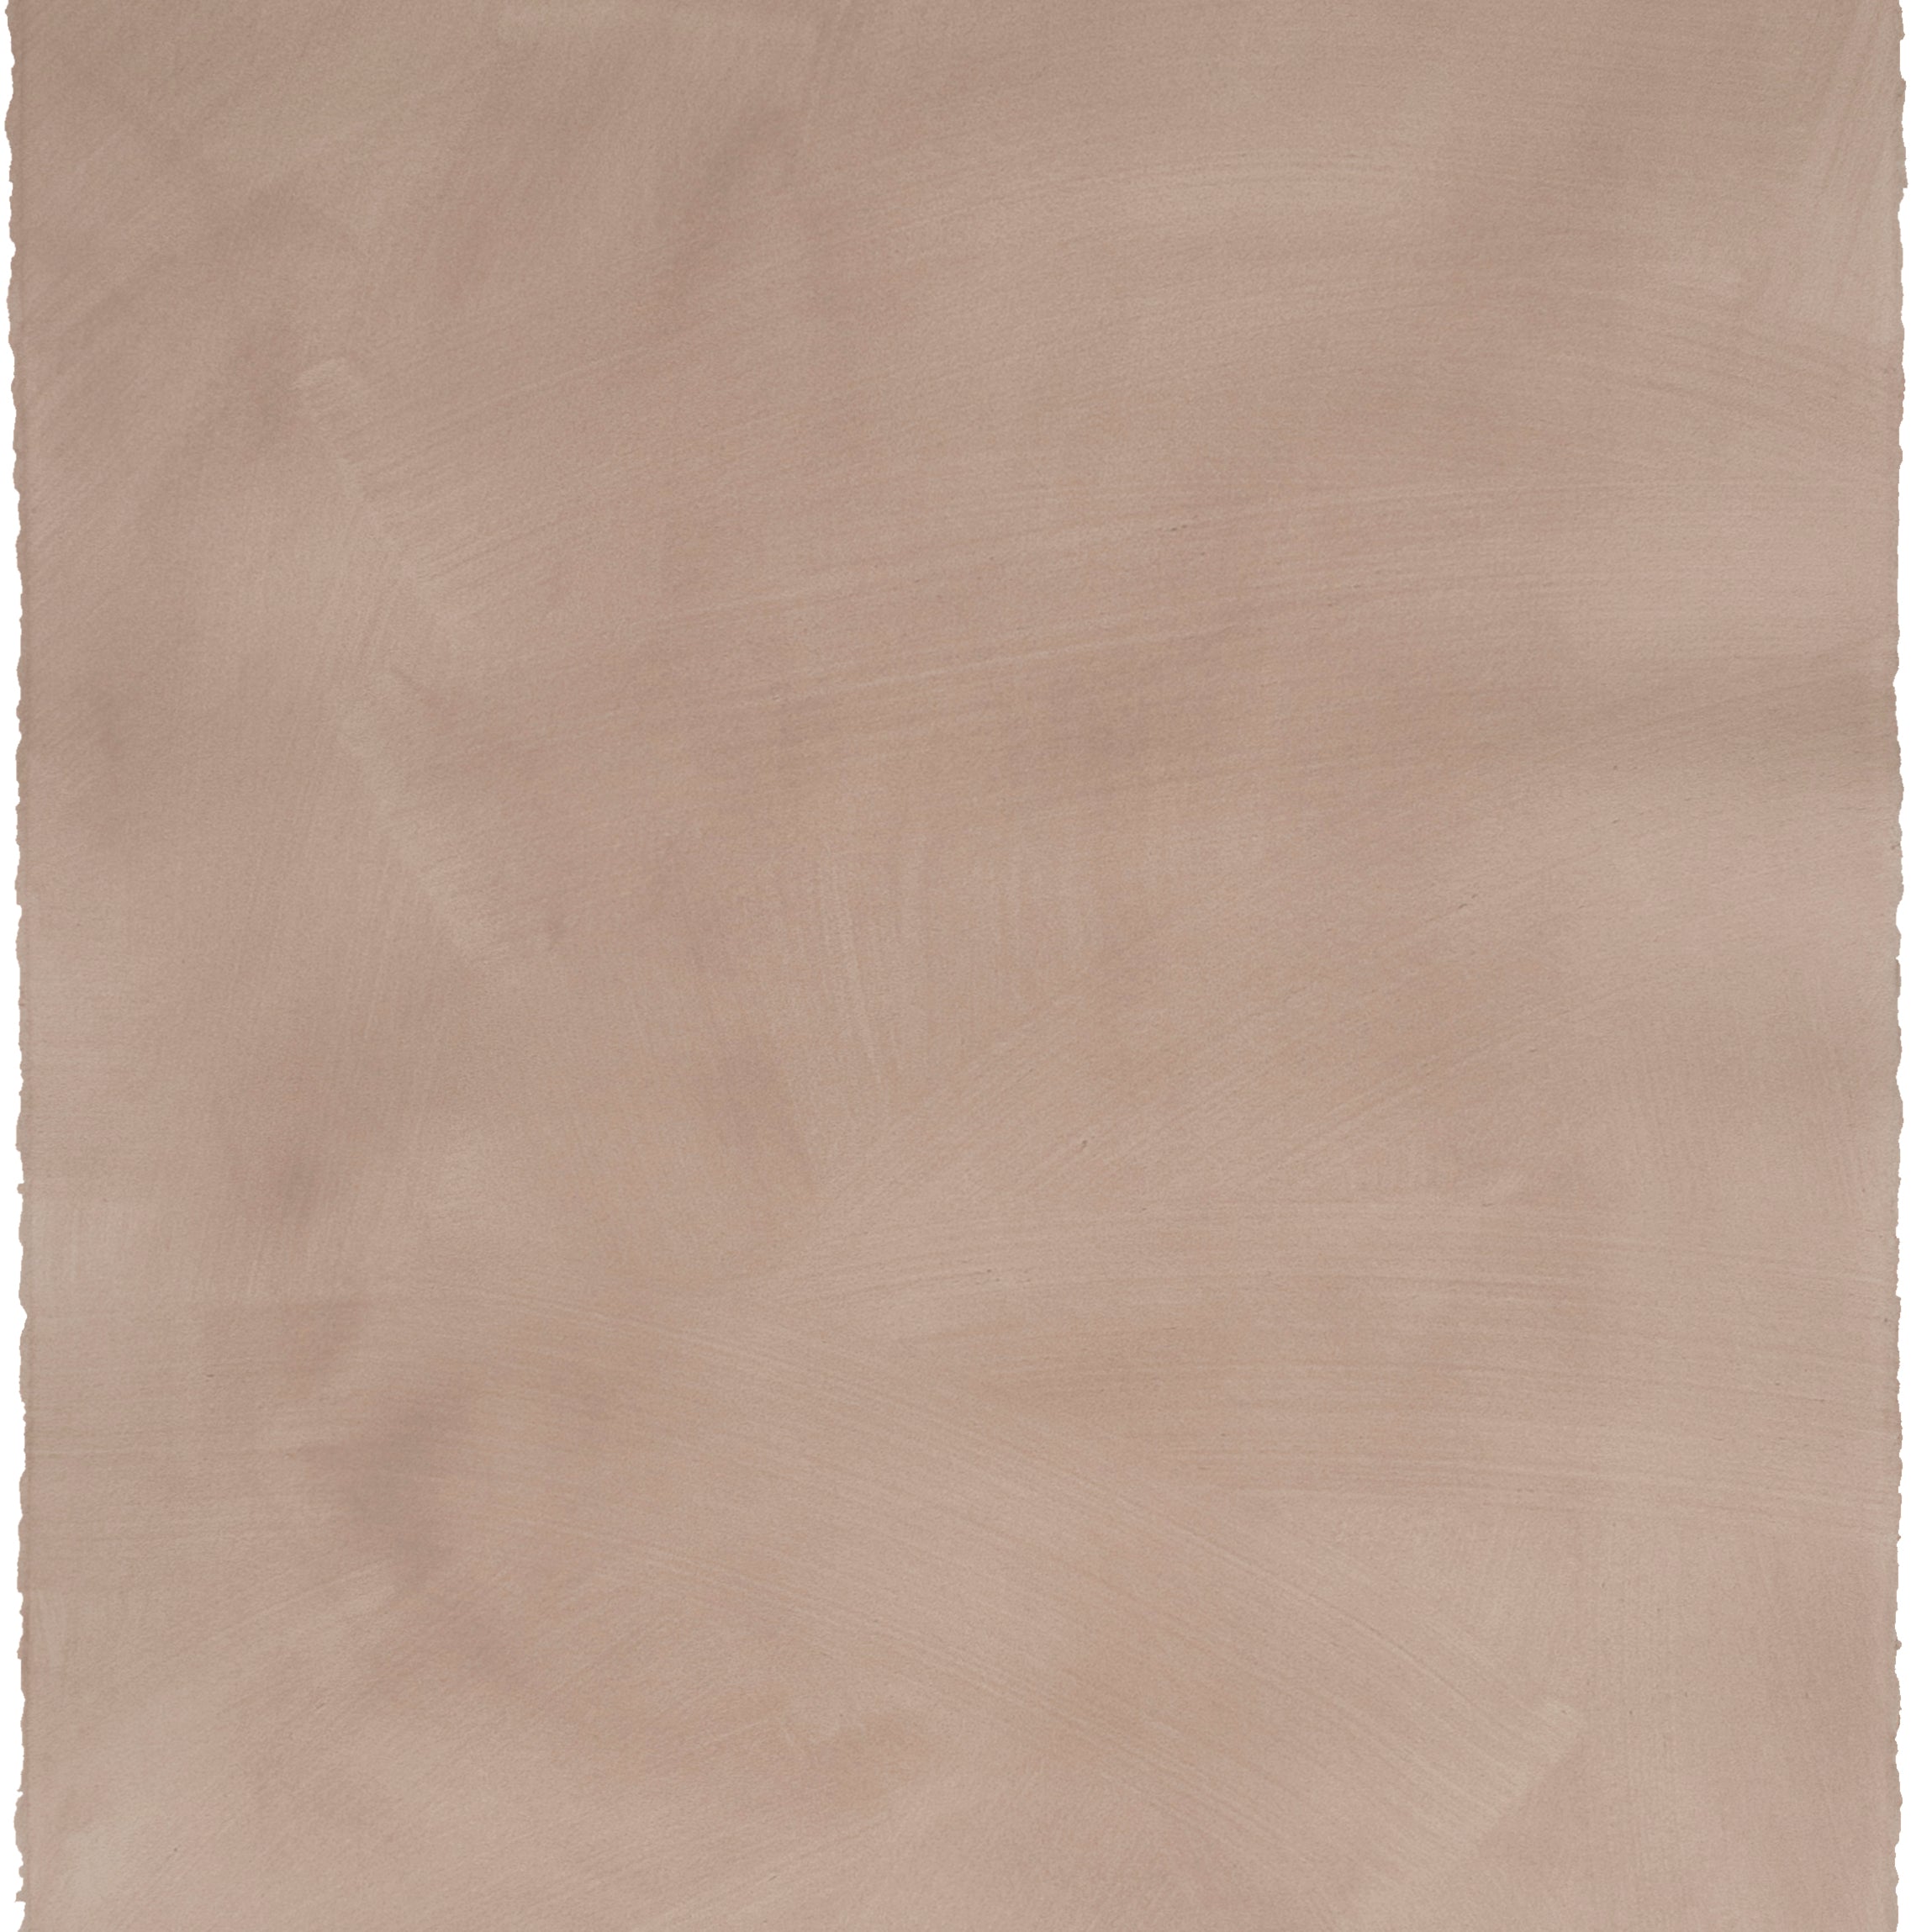 Sheet of hand-painted wallpaper in dusty rose with an irregular brushed texture.